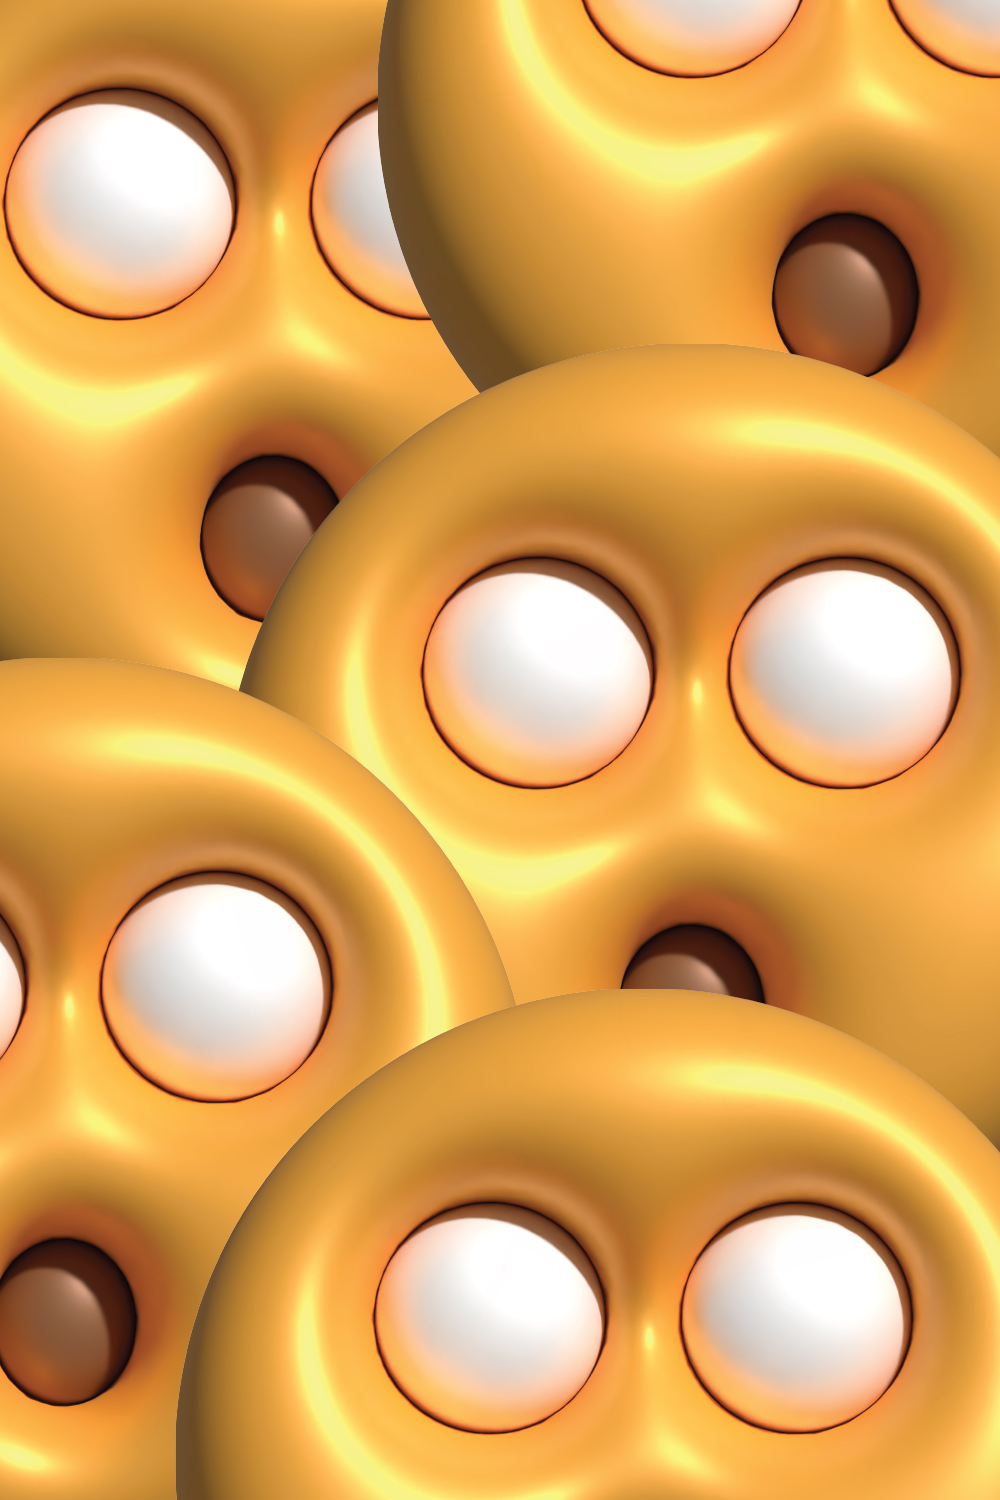 Bunch of round objects that are yellow.